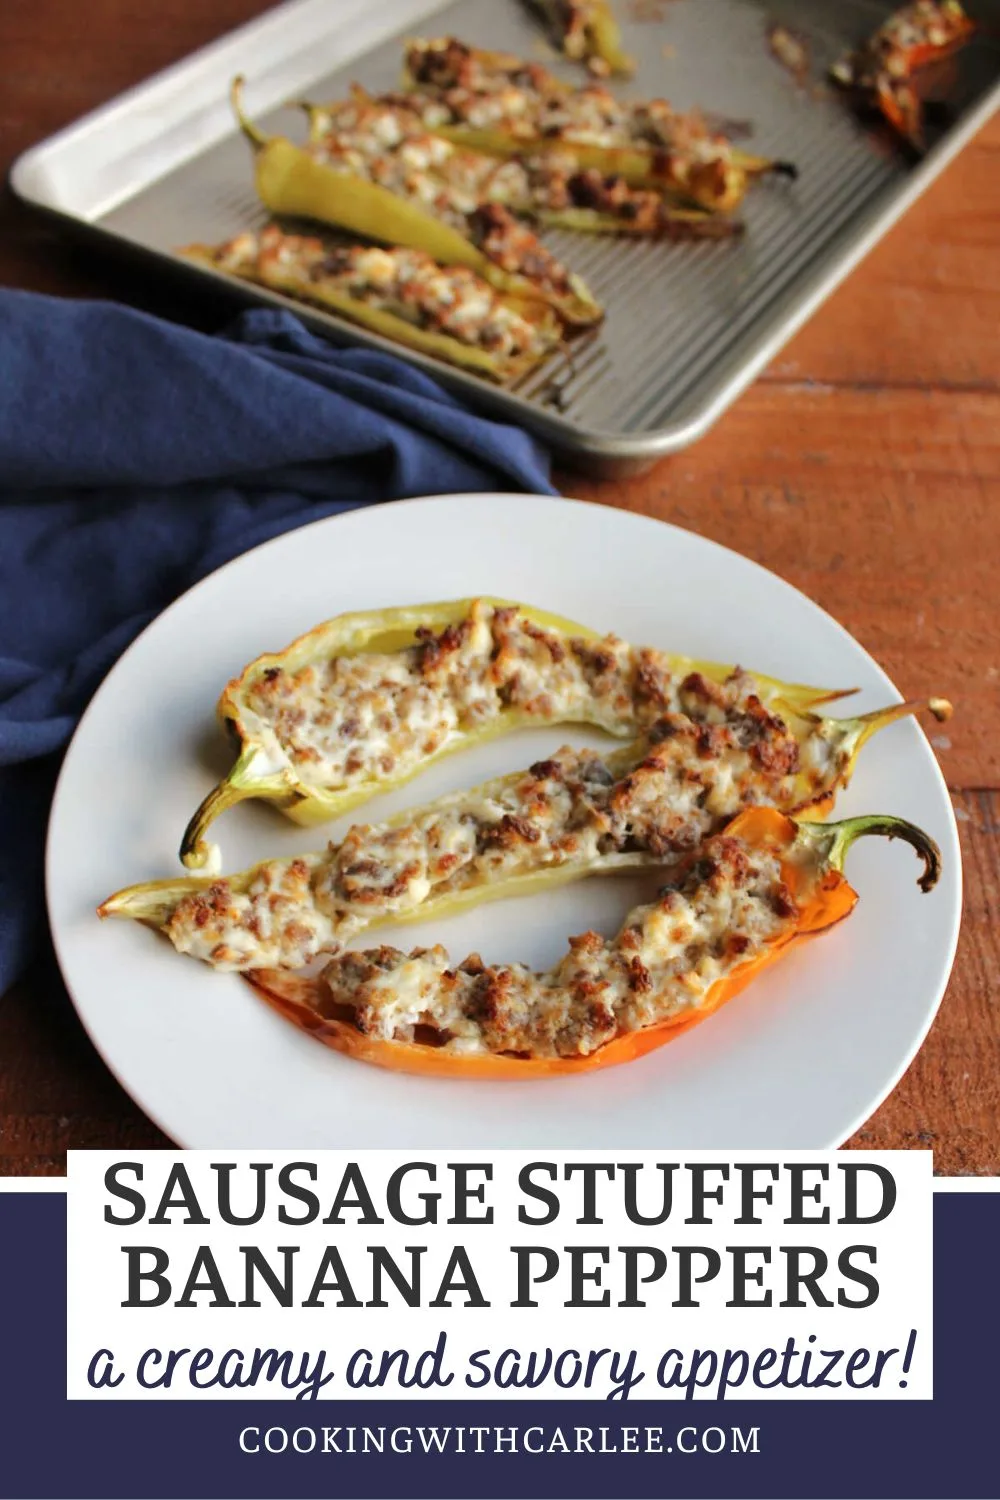 These sausage stuffed banana peppers are the perfect appetizer. They only take 4 simple ingredients to make and they are a great way to get the idea of a jalapeno popper without the heat.